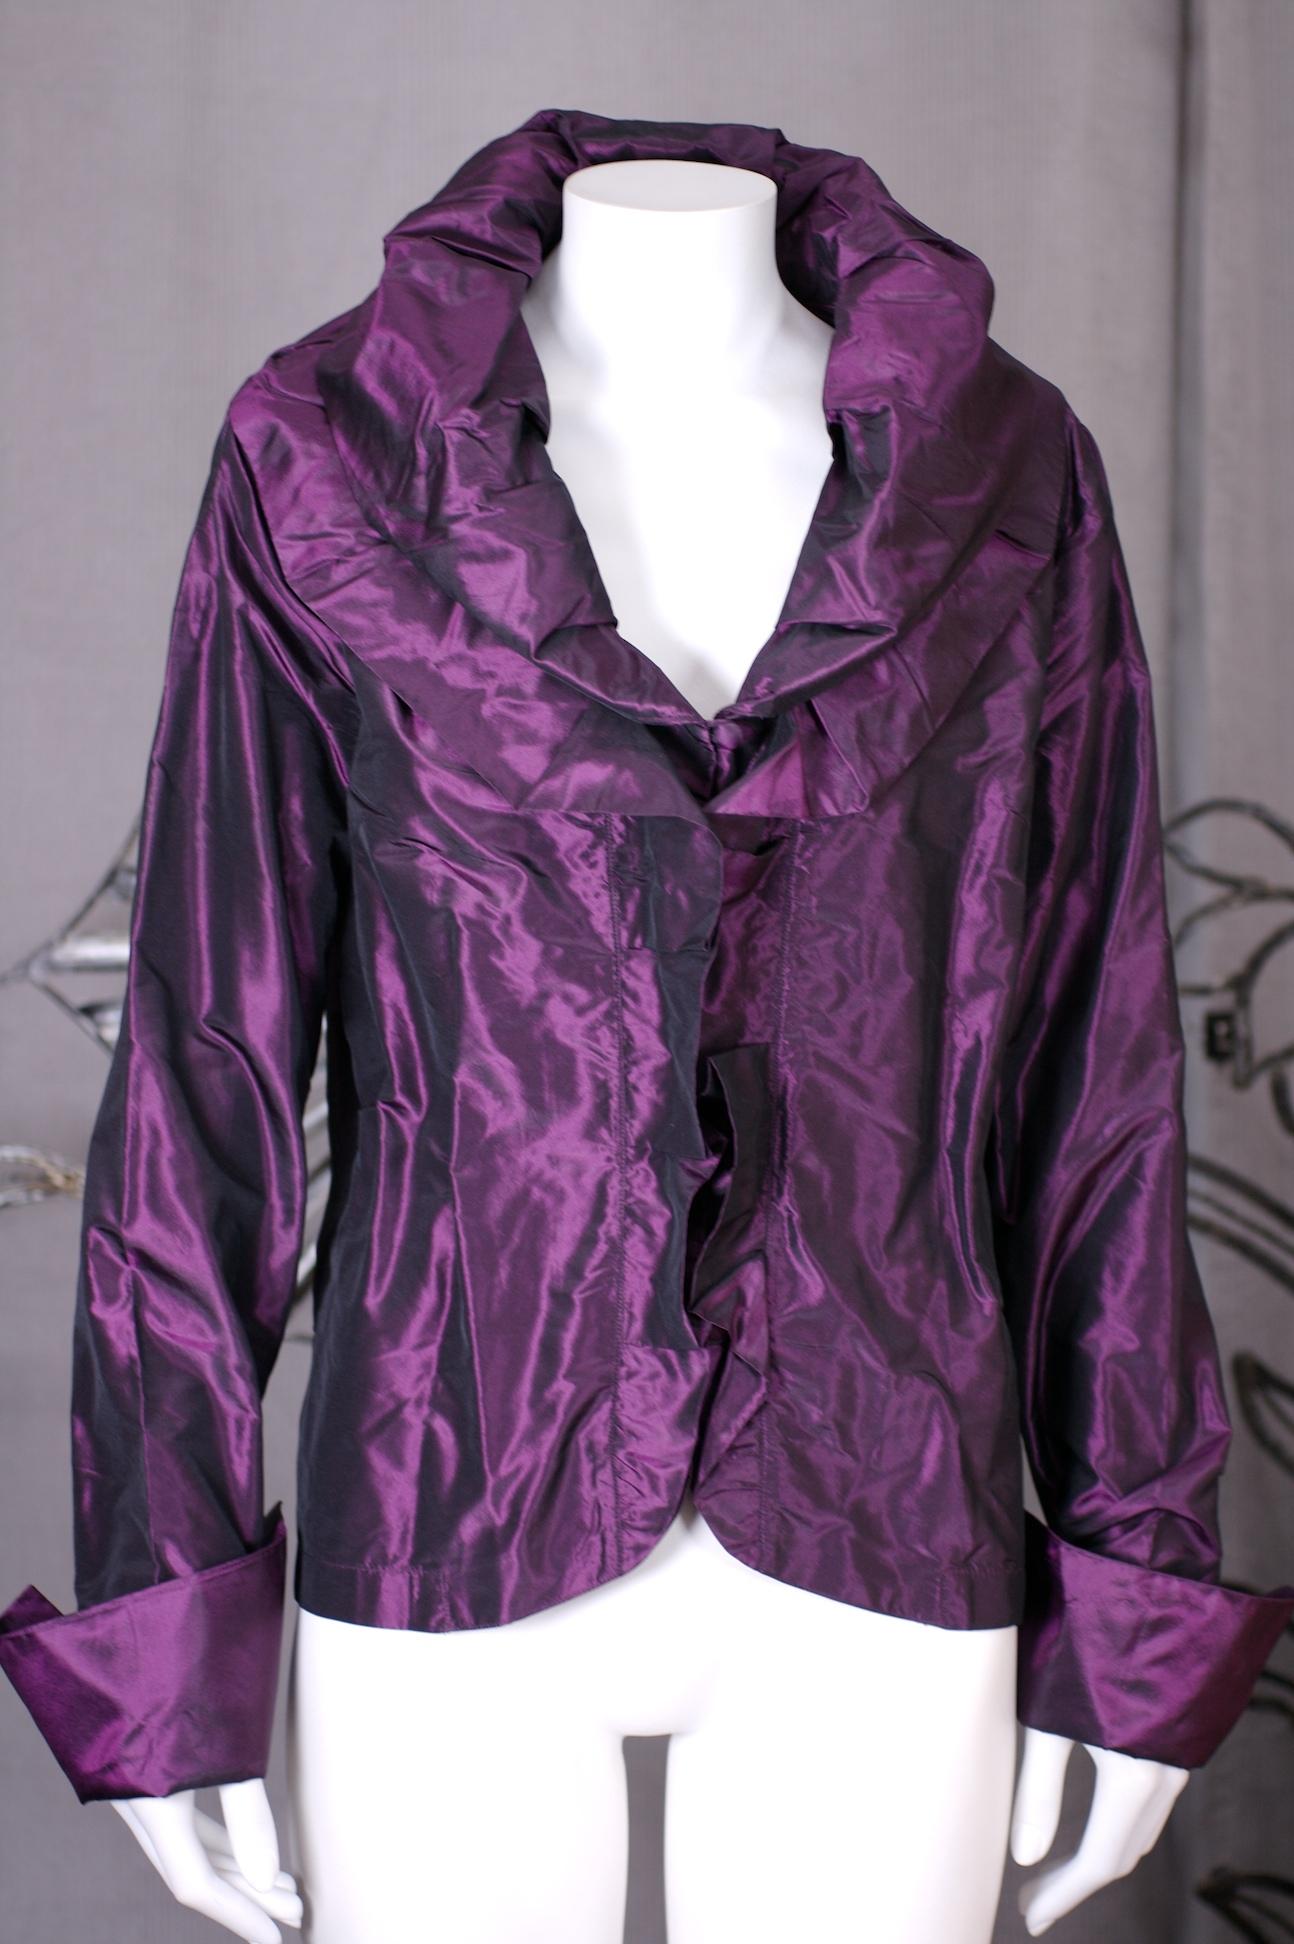 Deep Purple Taffeta Blouse from Camiceria San Marco, Venice. The Camiceria was an institution in Venice, providing custom dressmaking services for tourists and well heeled locals alike. 
Deep violet silk taffeta blouse with double ruffle which